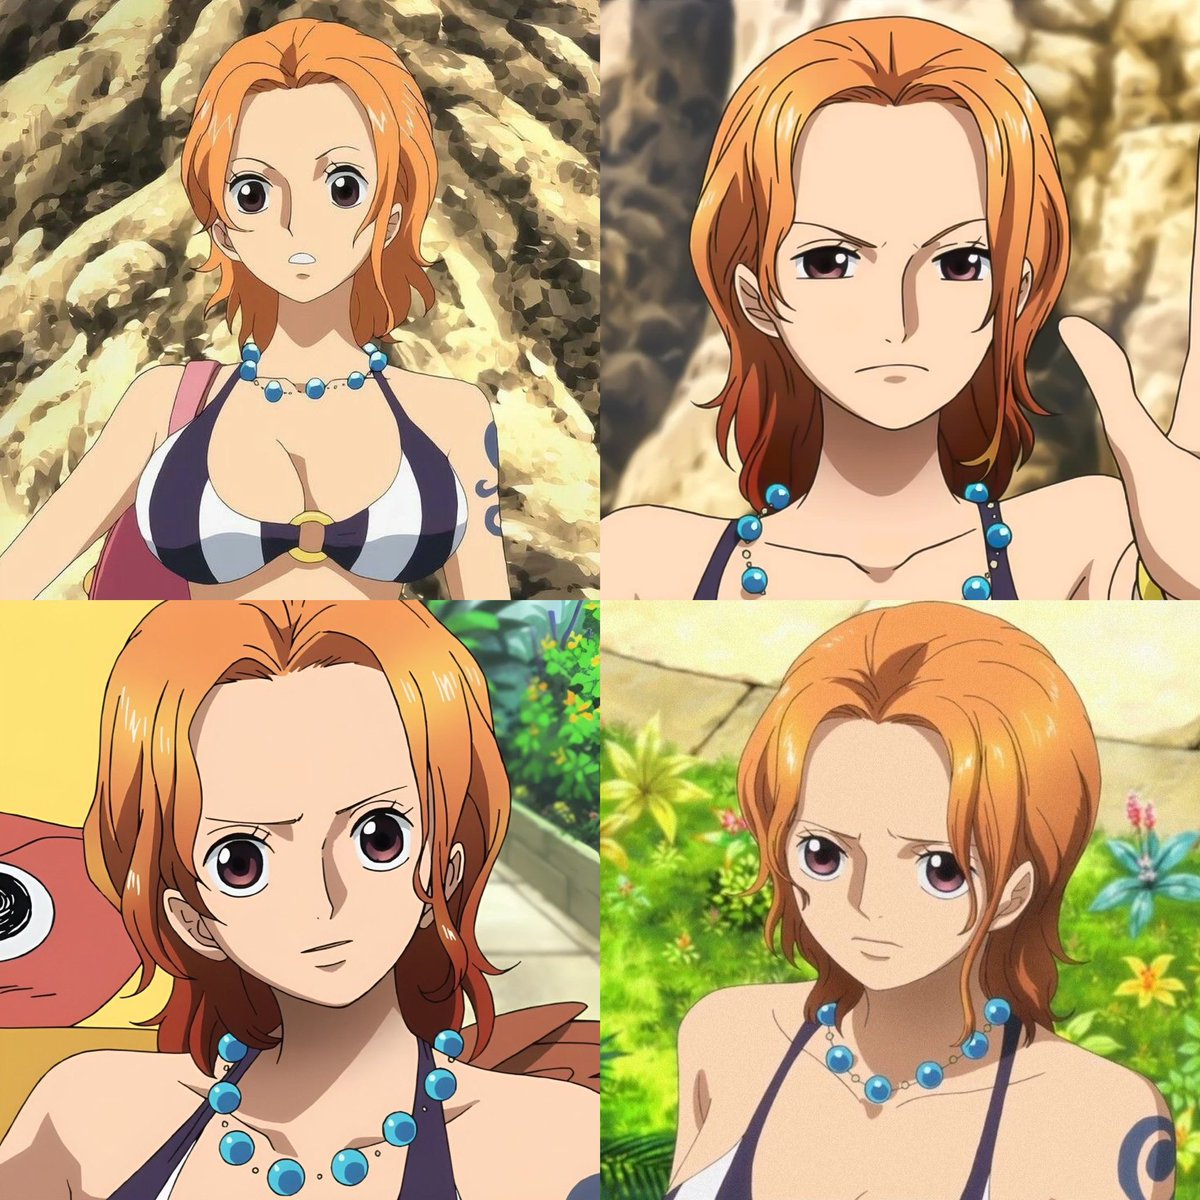 Nami in a «strong world» 😍